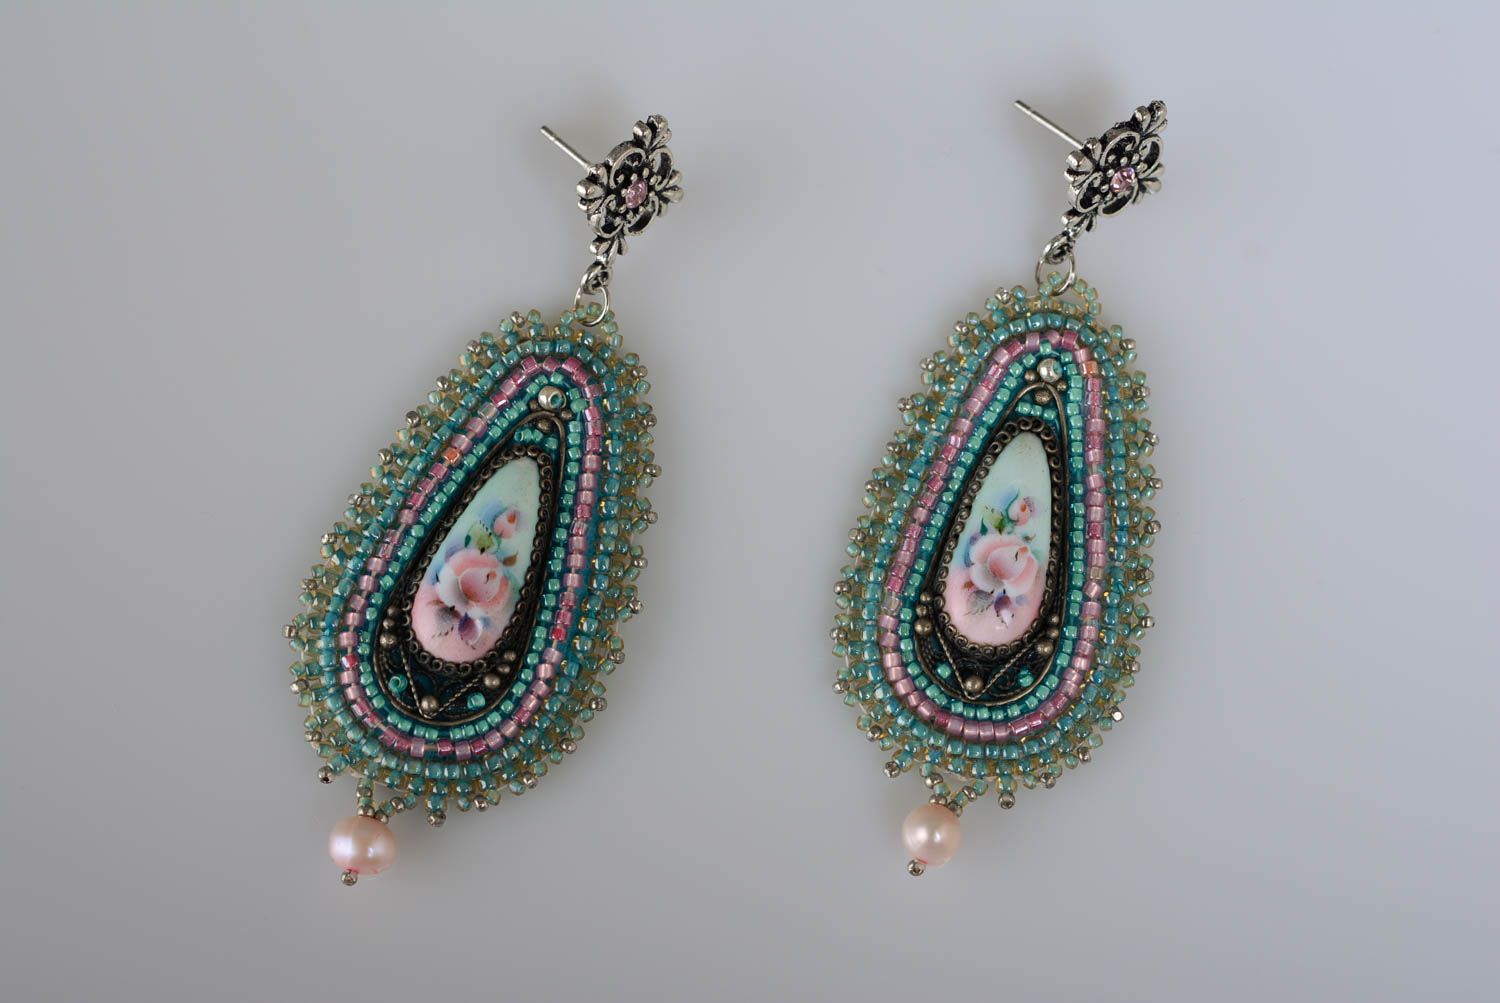 Handmade vintage bead embroidered dangling earrings with natural stones photo 1